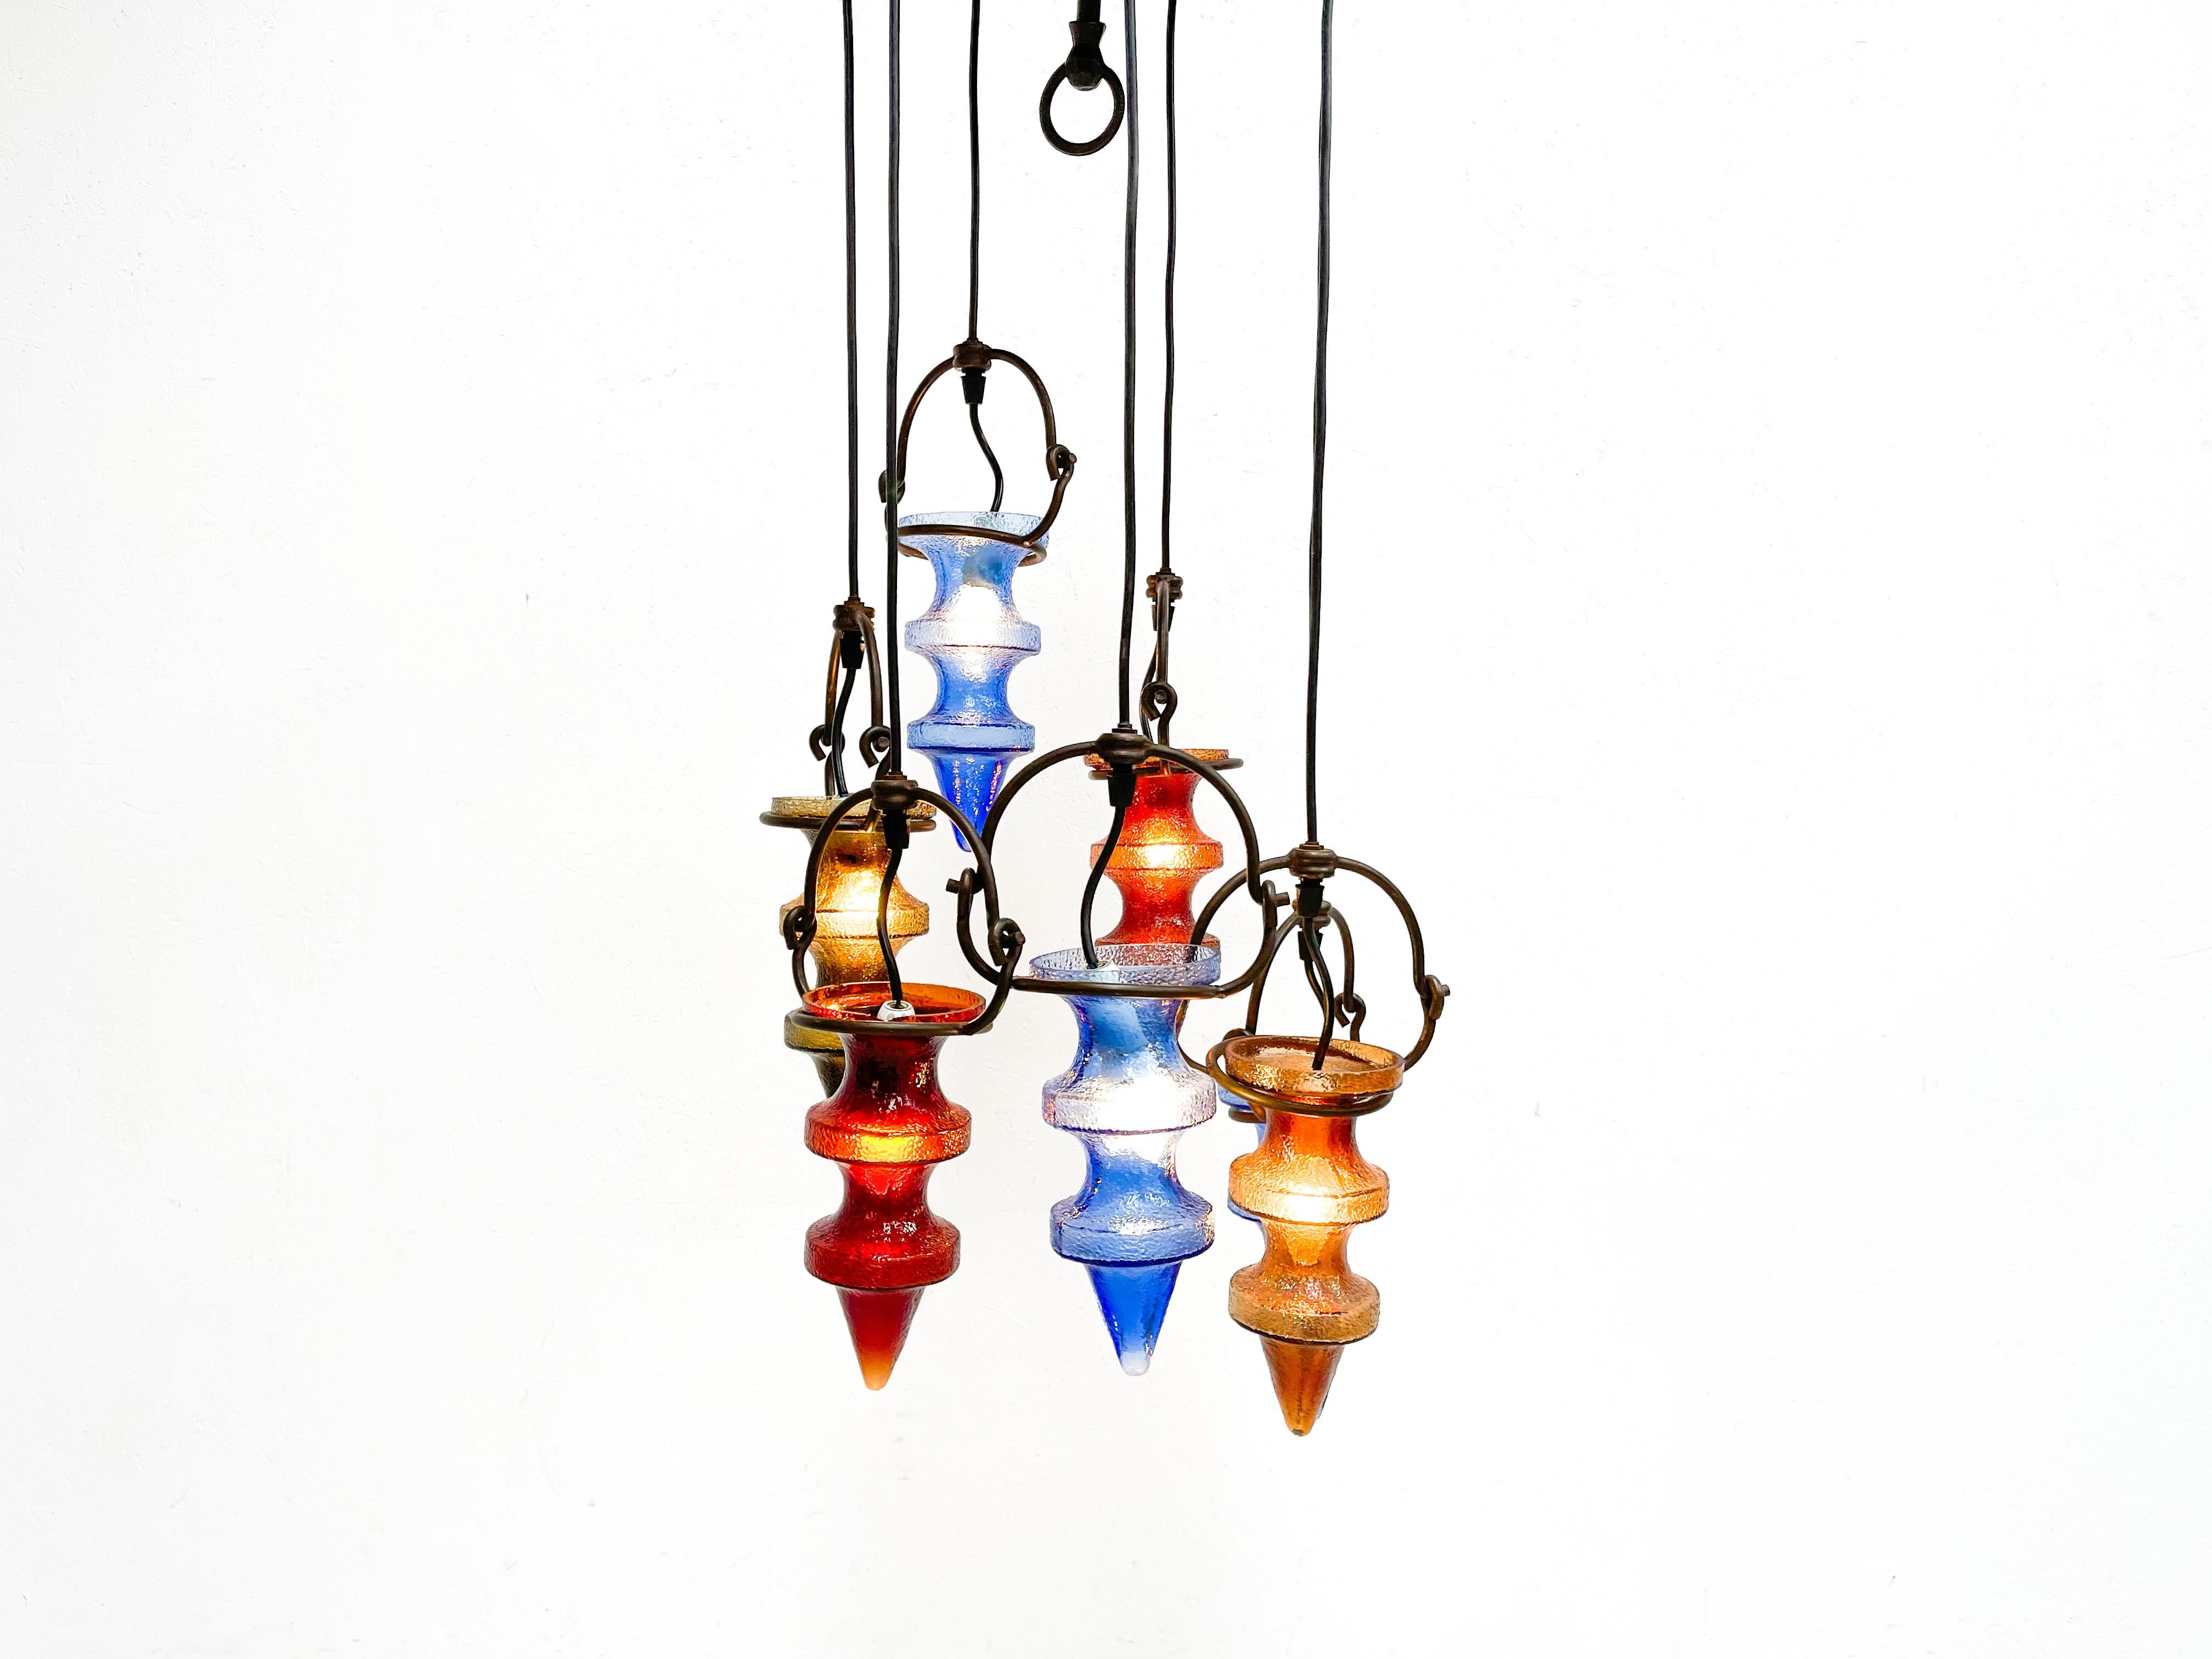 mpressive glass chandelier by famous Finnish designer Nanny Still. This chandelier was produced in the 1960's by Belgian manufacter Massive. This chandelier has the typical colored glass 